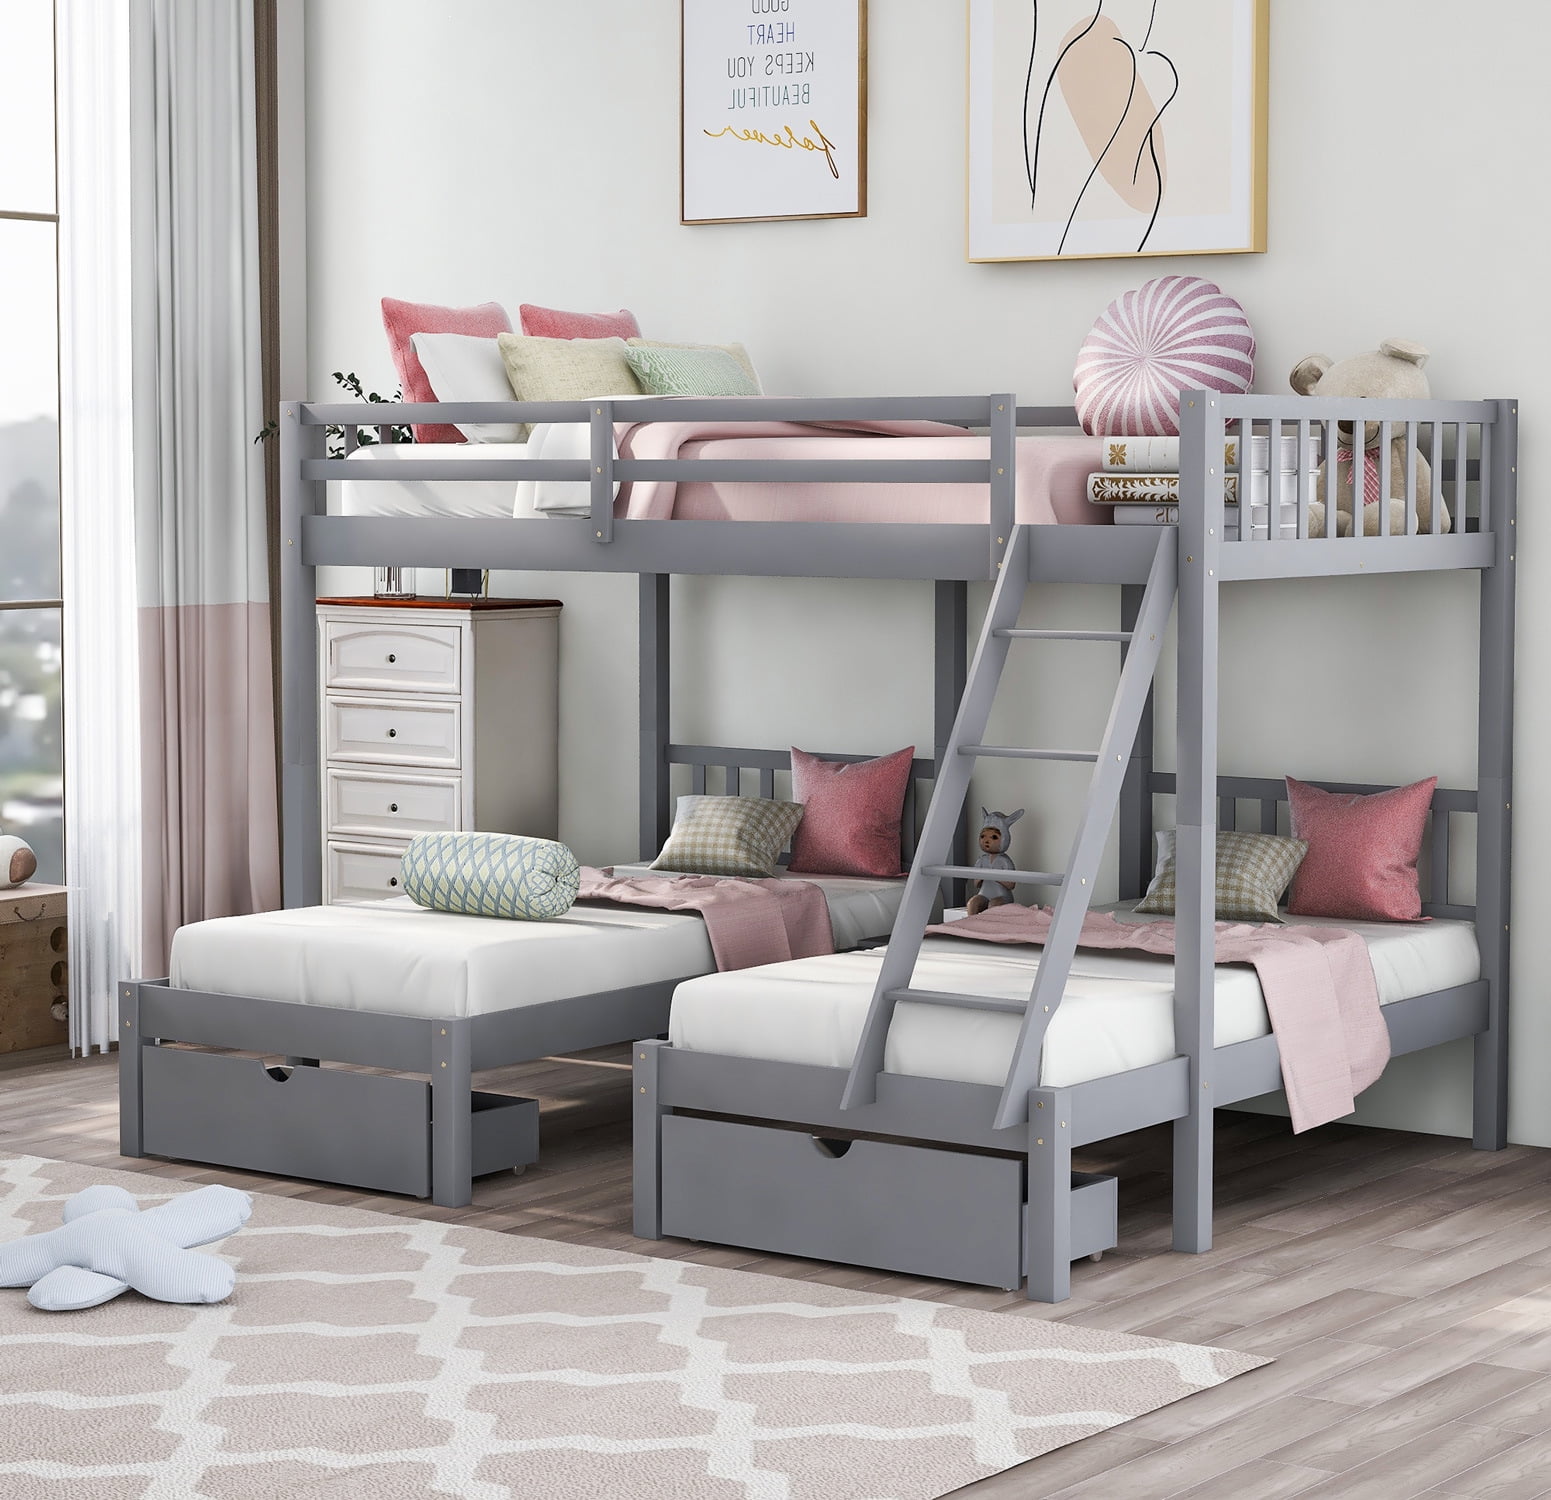 Twin Triple Bunk Bed Wooden Frame, Triple Bunk Beds With Steps